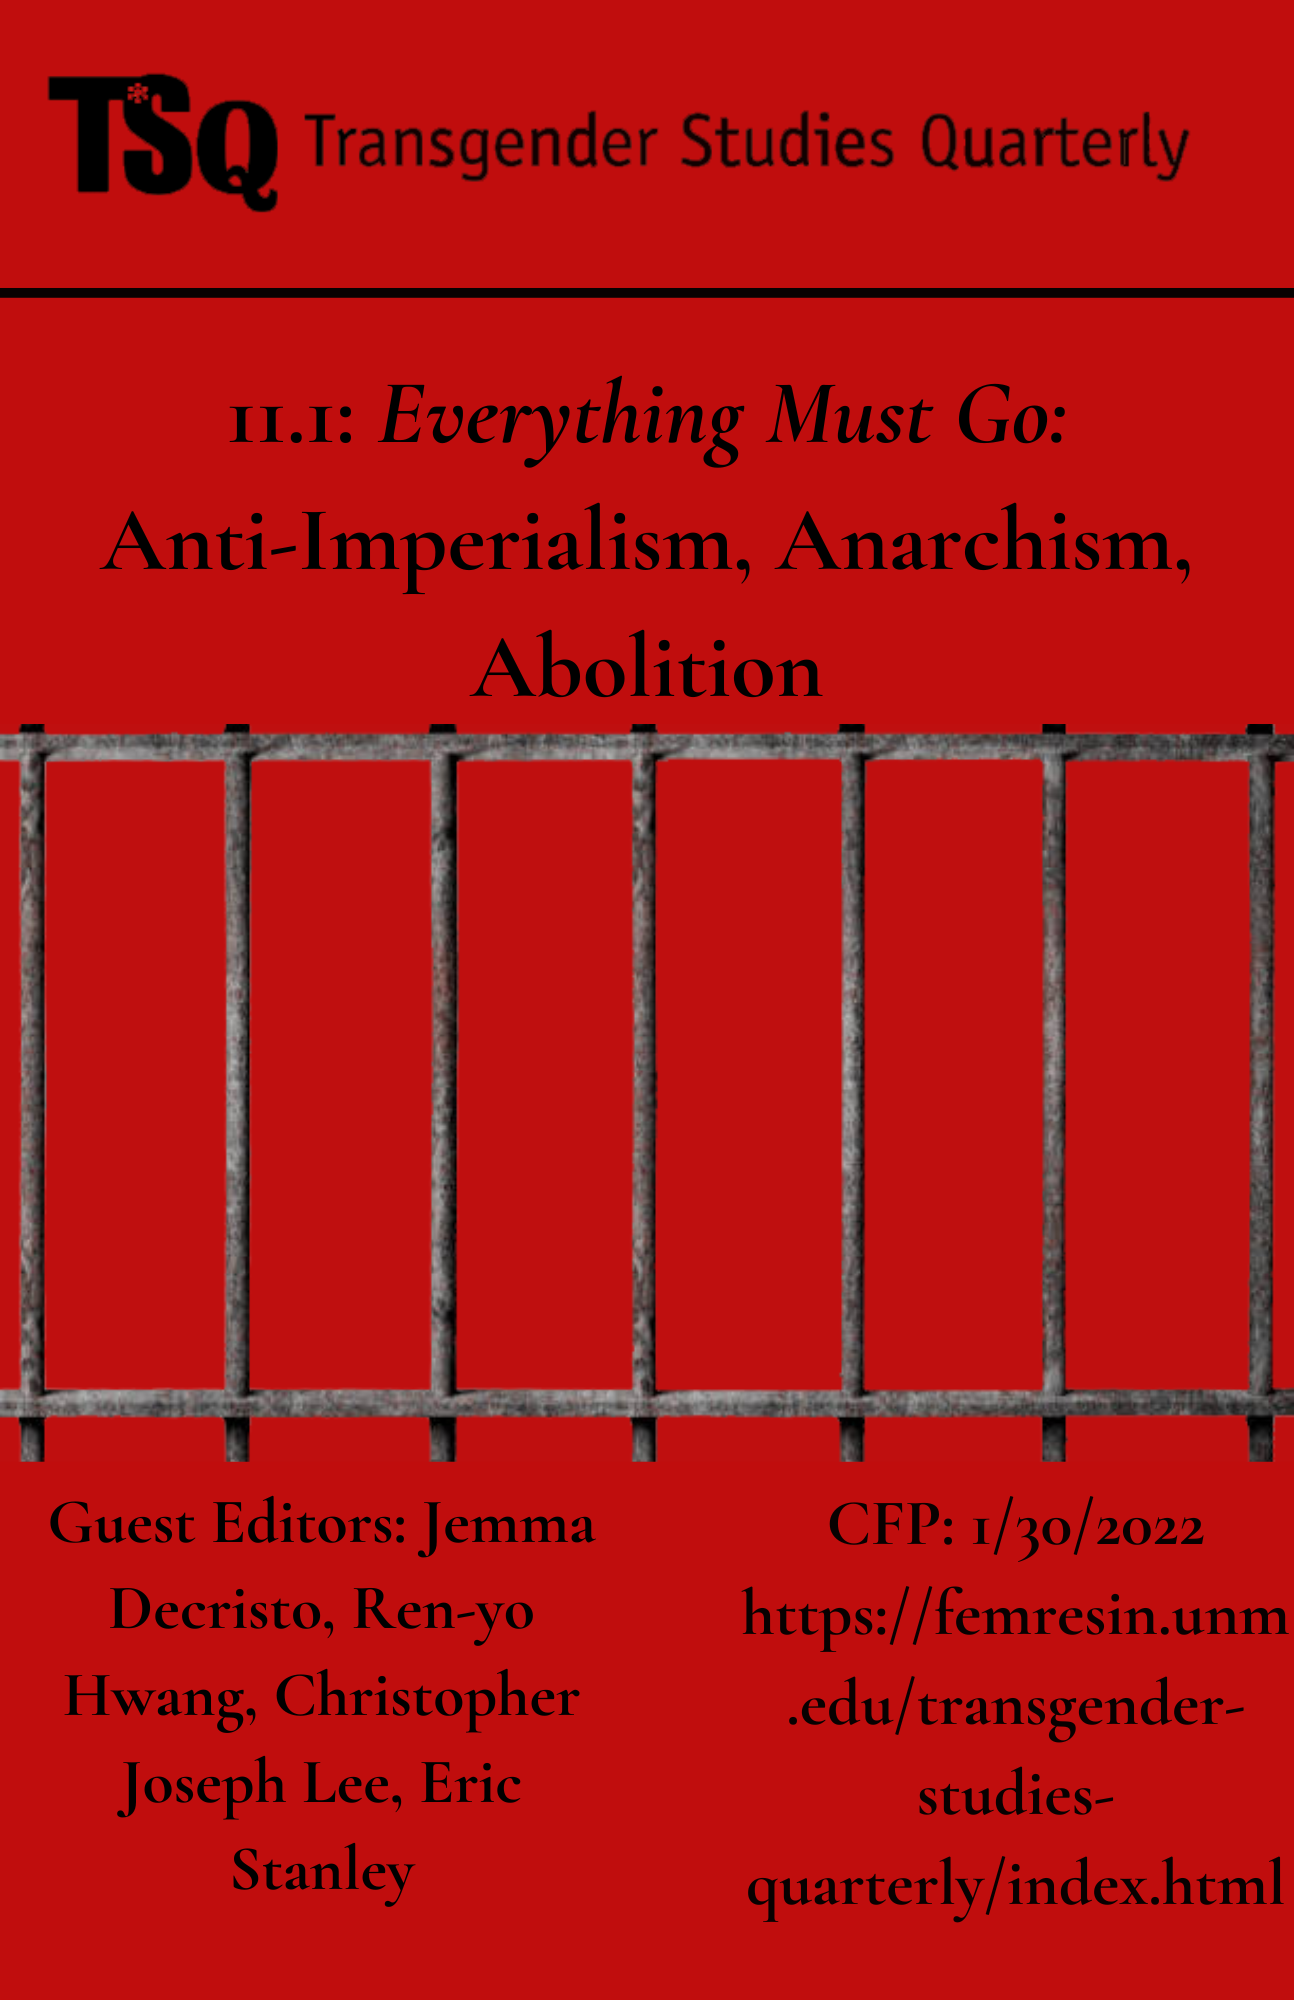 11.1-everything-must-go-anti-imperialism,-anarchism,-abolition.png